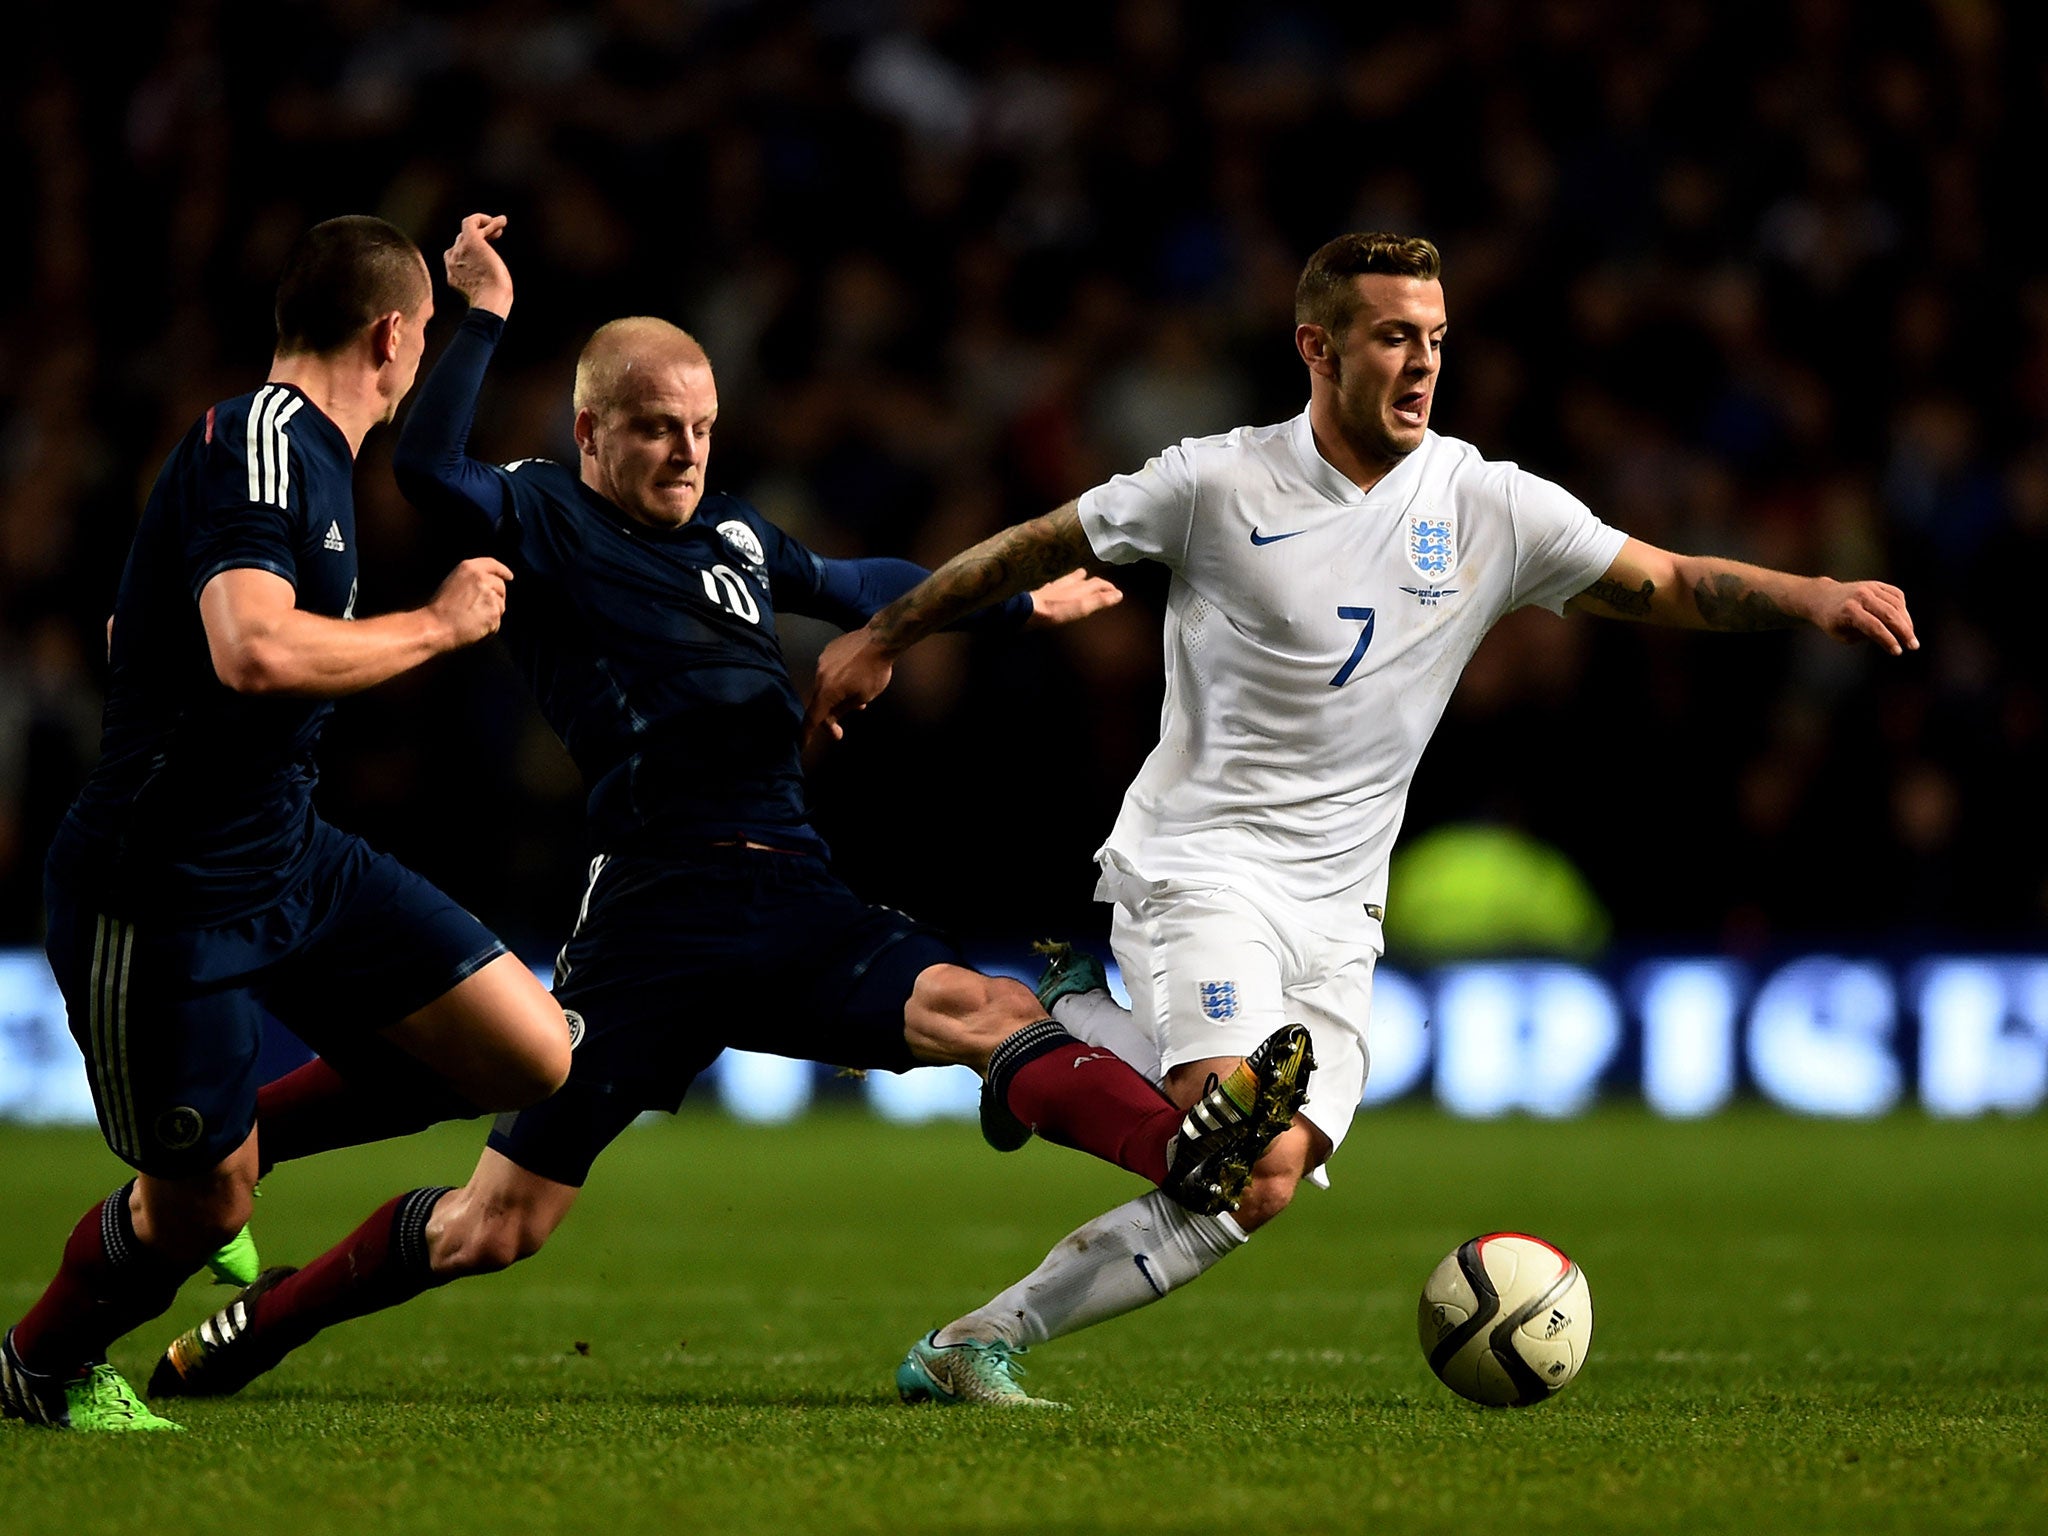 Jack Wilshere playing for England against Scotland this week